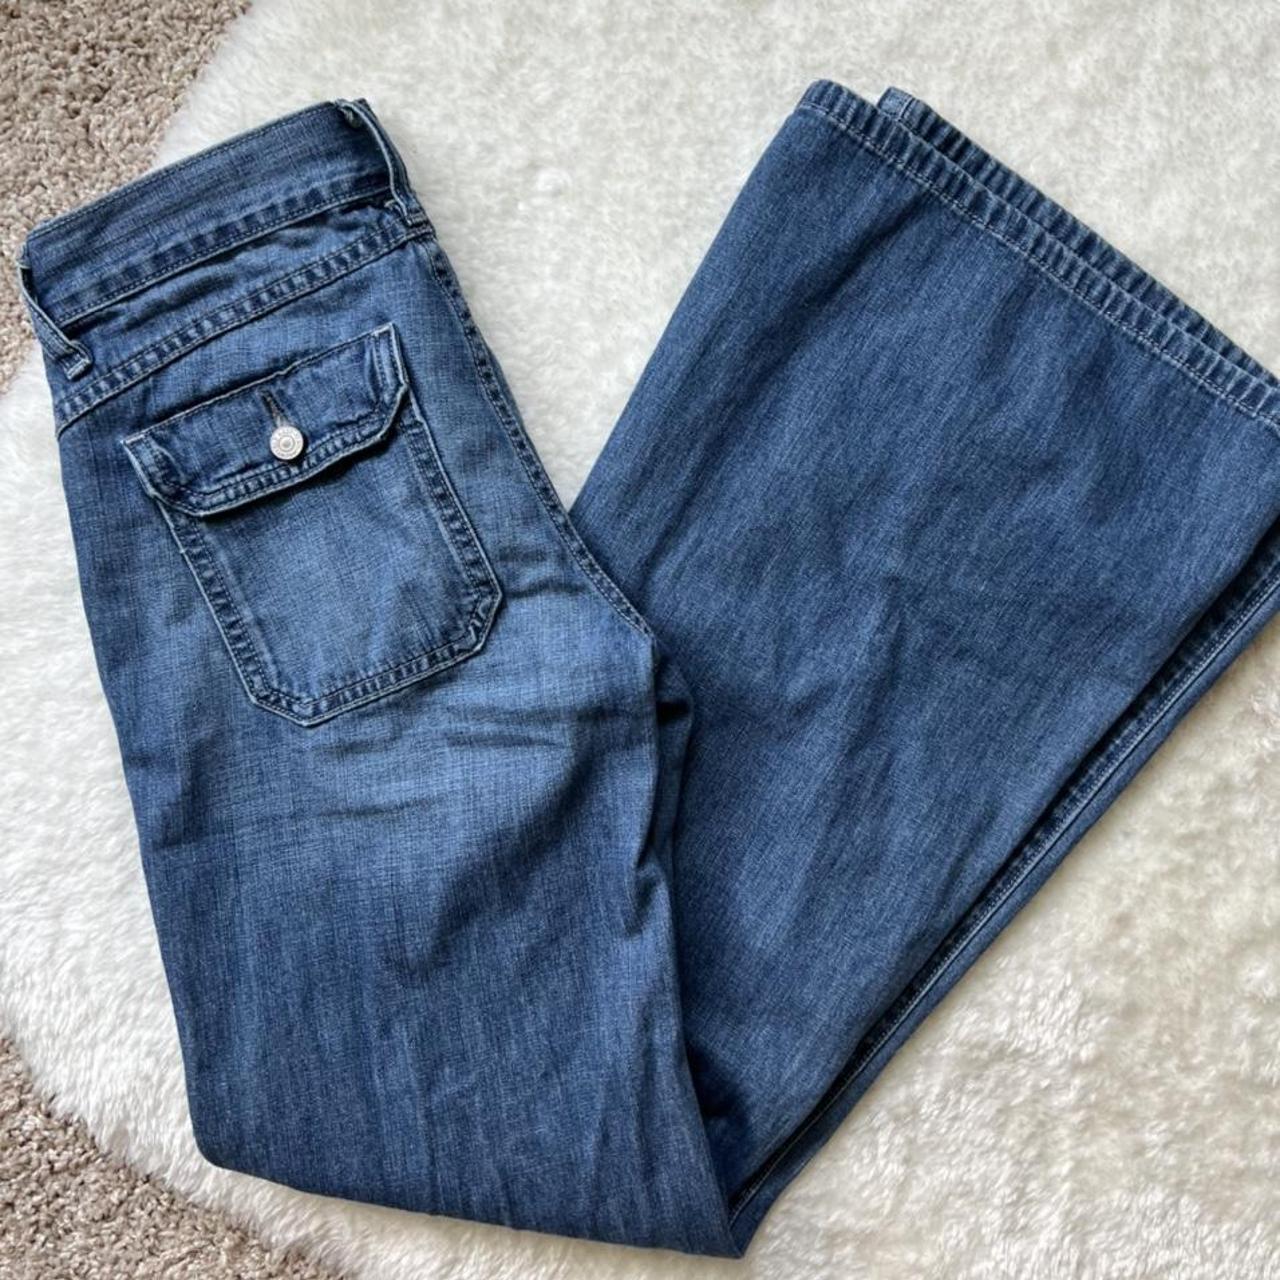 Old Navy Women's Blue and Navy Jeans | Depop